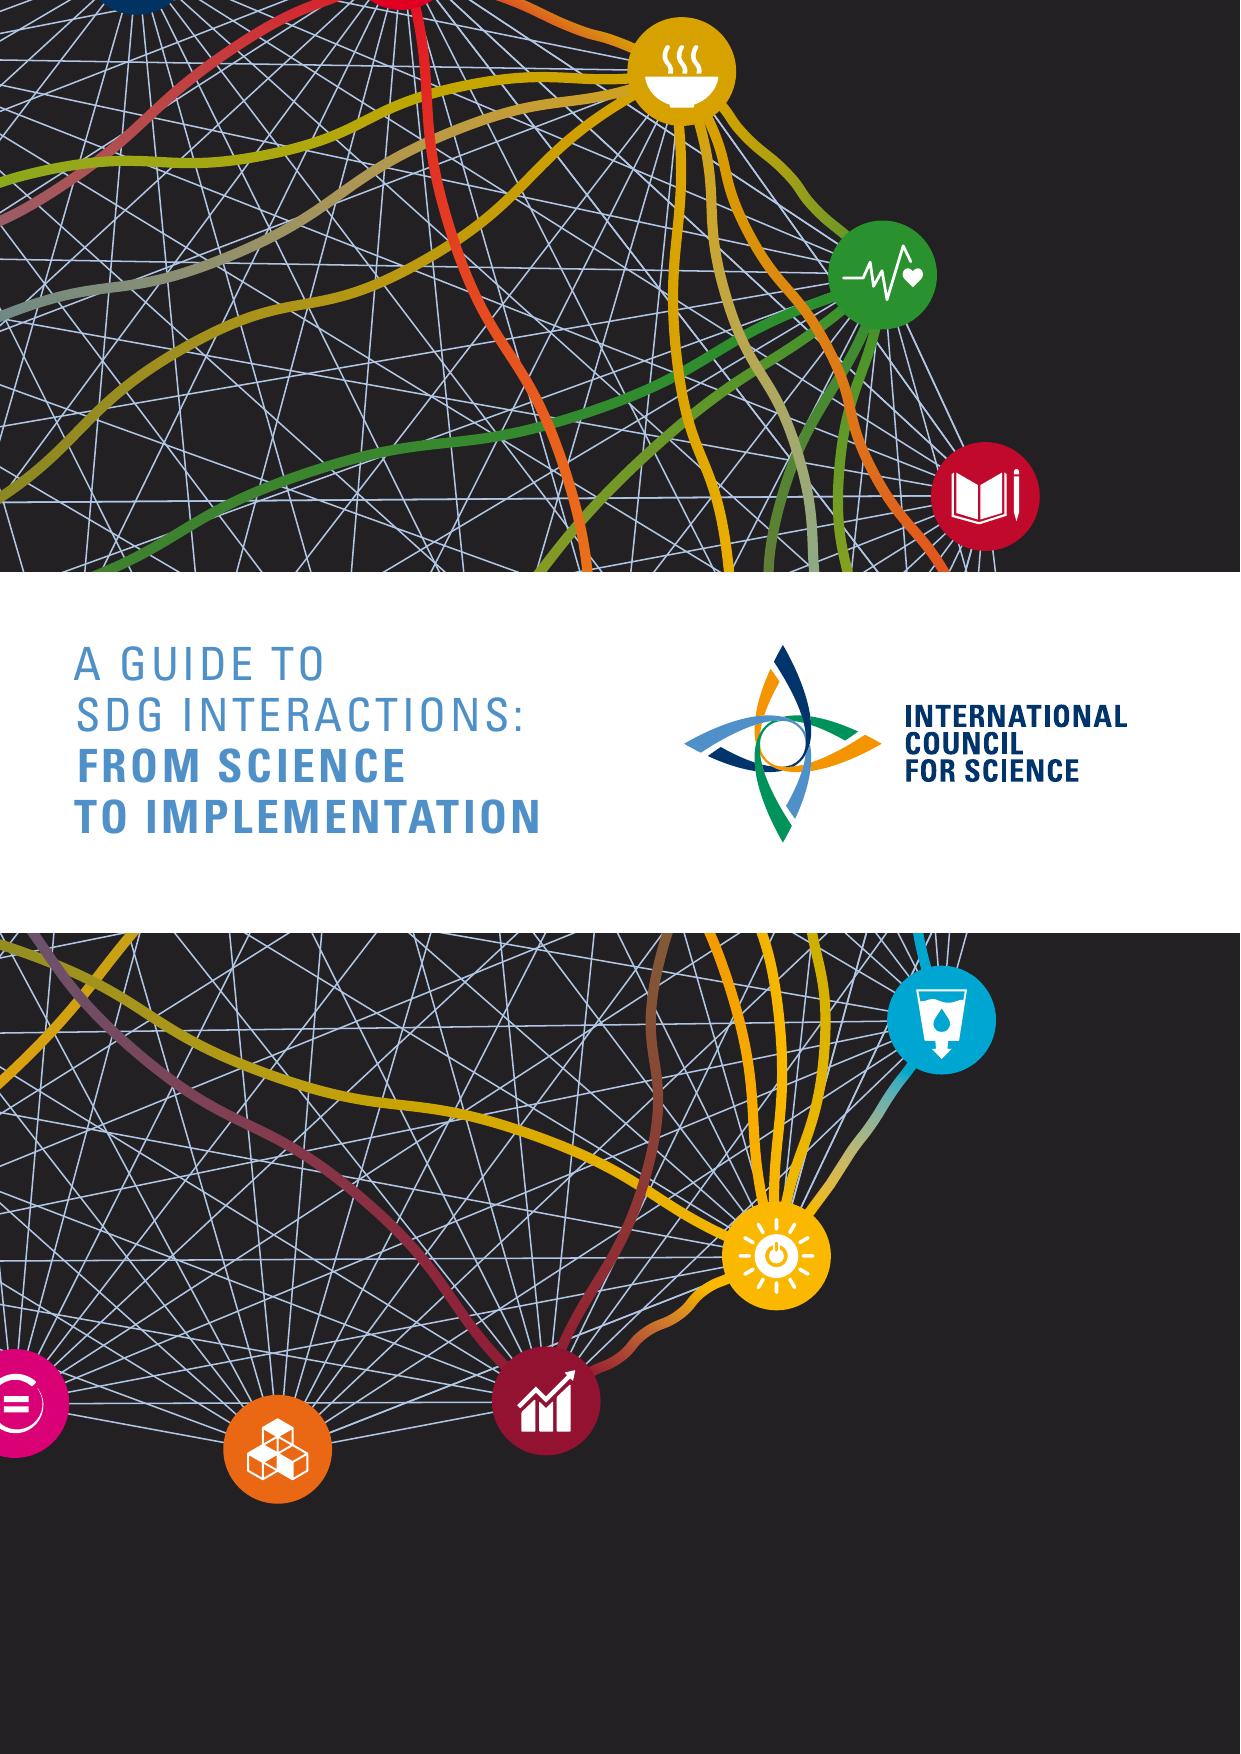 A guide to SDG interactions : from science to implementation [SDG : Sustainable Development Goals]